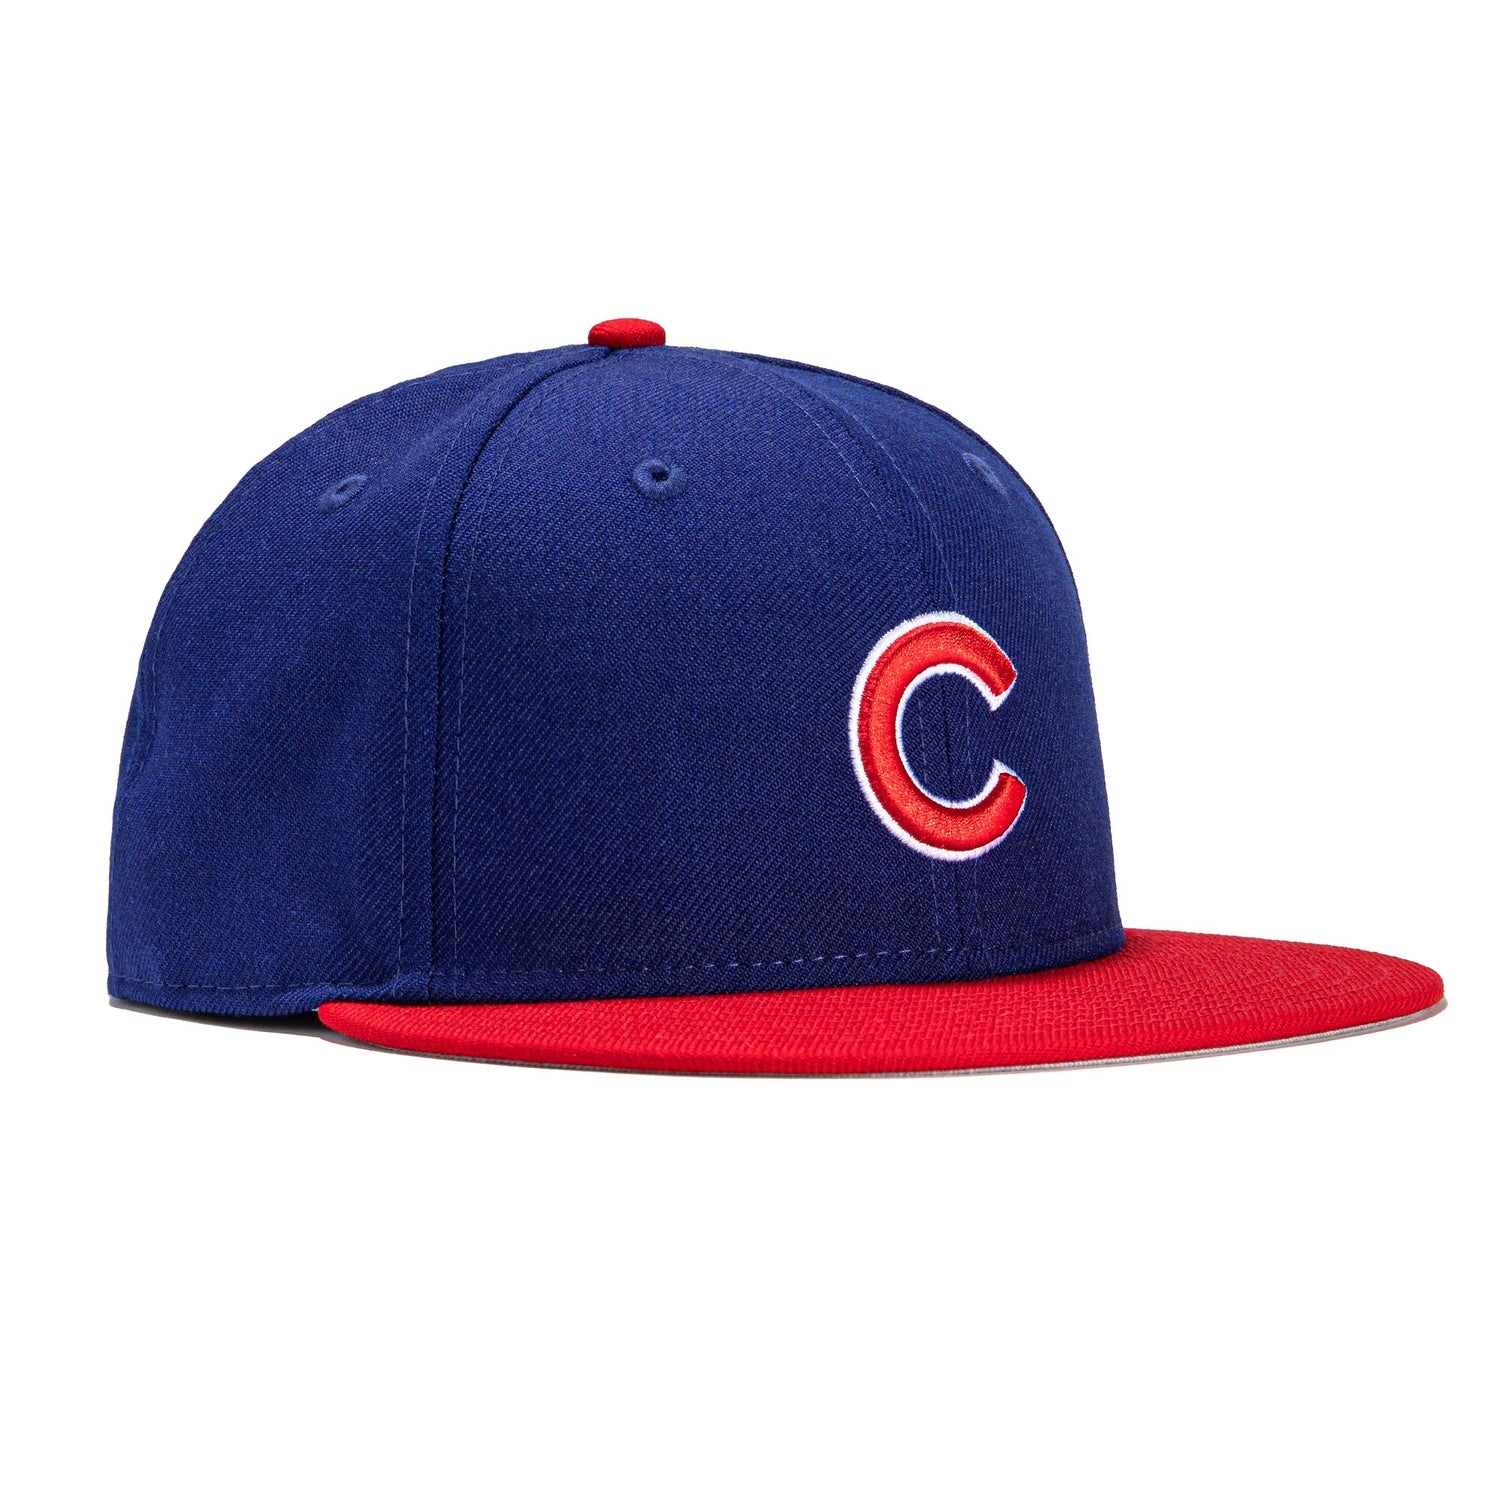 NEW ERA 59FIFTY FITTED CAP. AUTHENTIC MLB ON FIELD CAP. CHOICE OF TEAMS